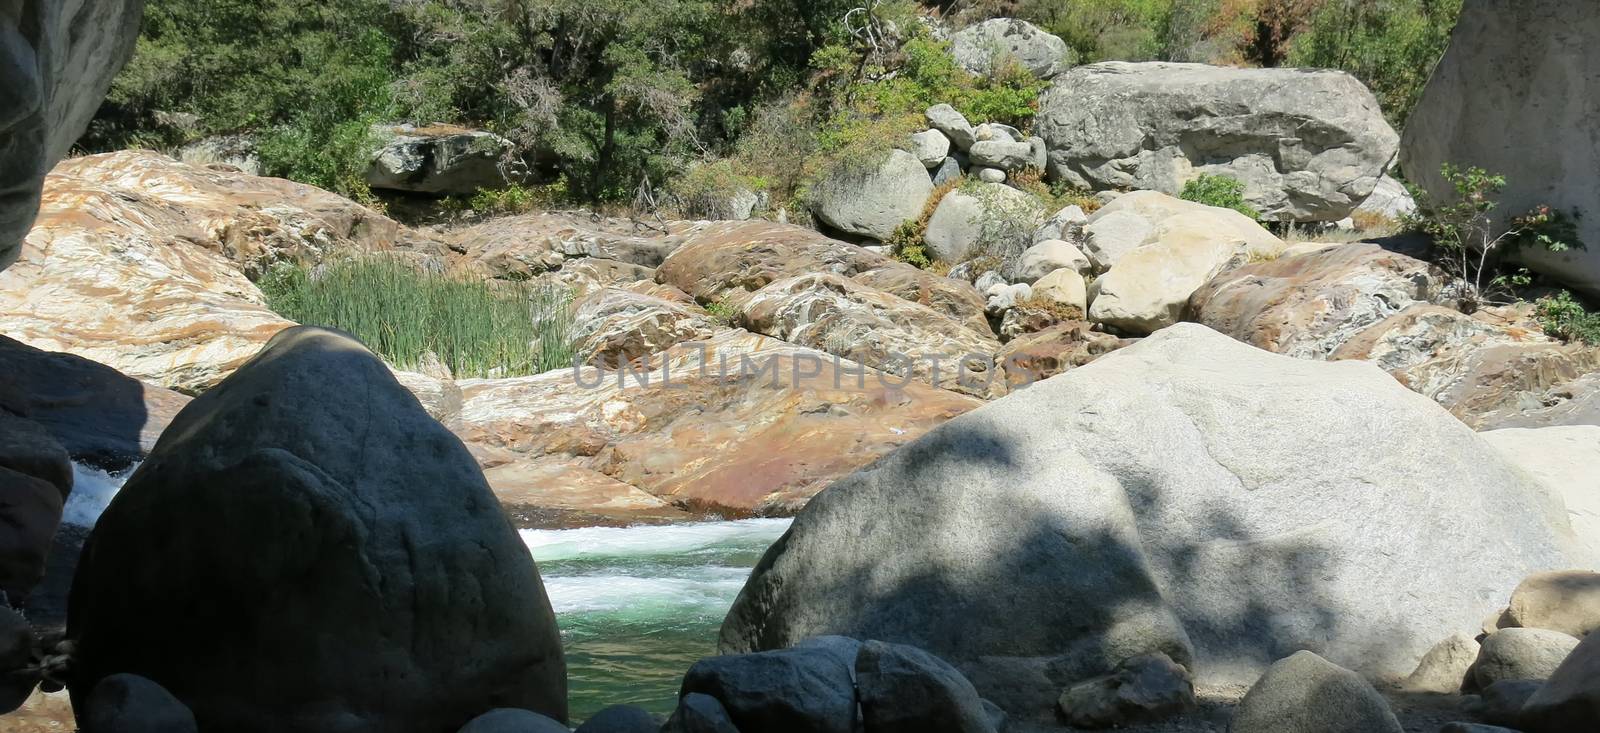 Many large boulders surround a river bed inside Sequoia National Forest.